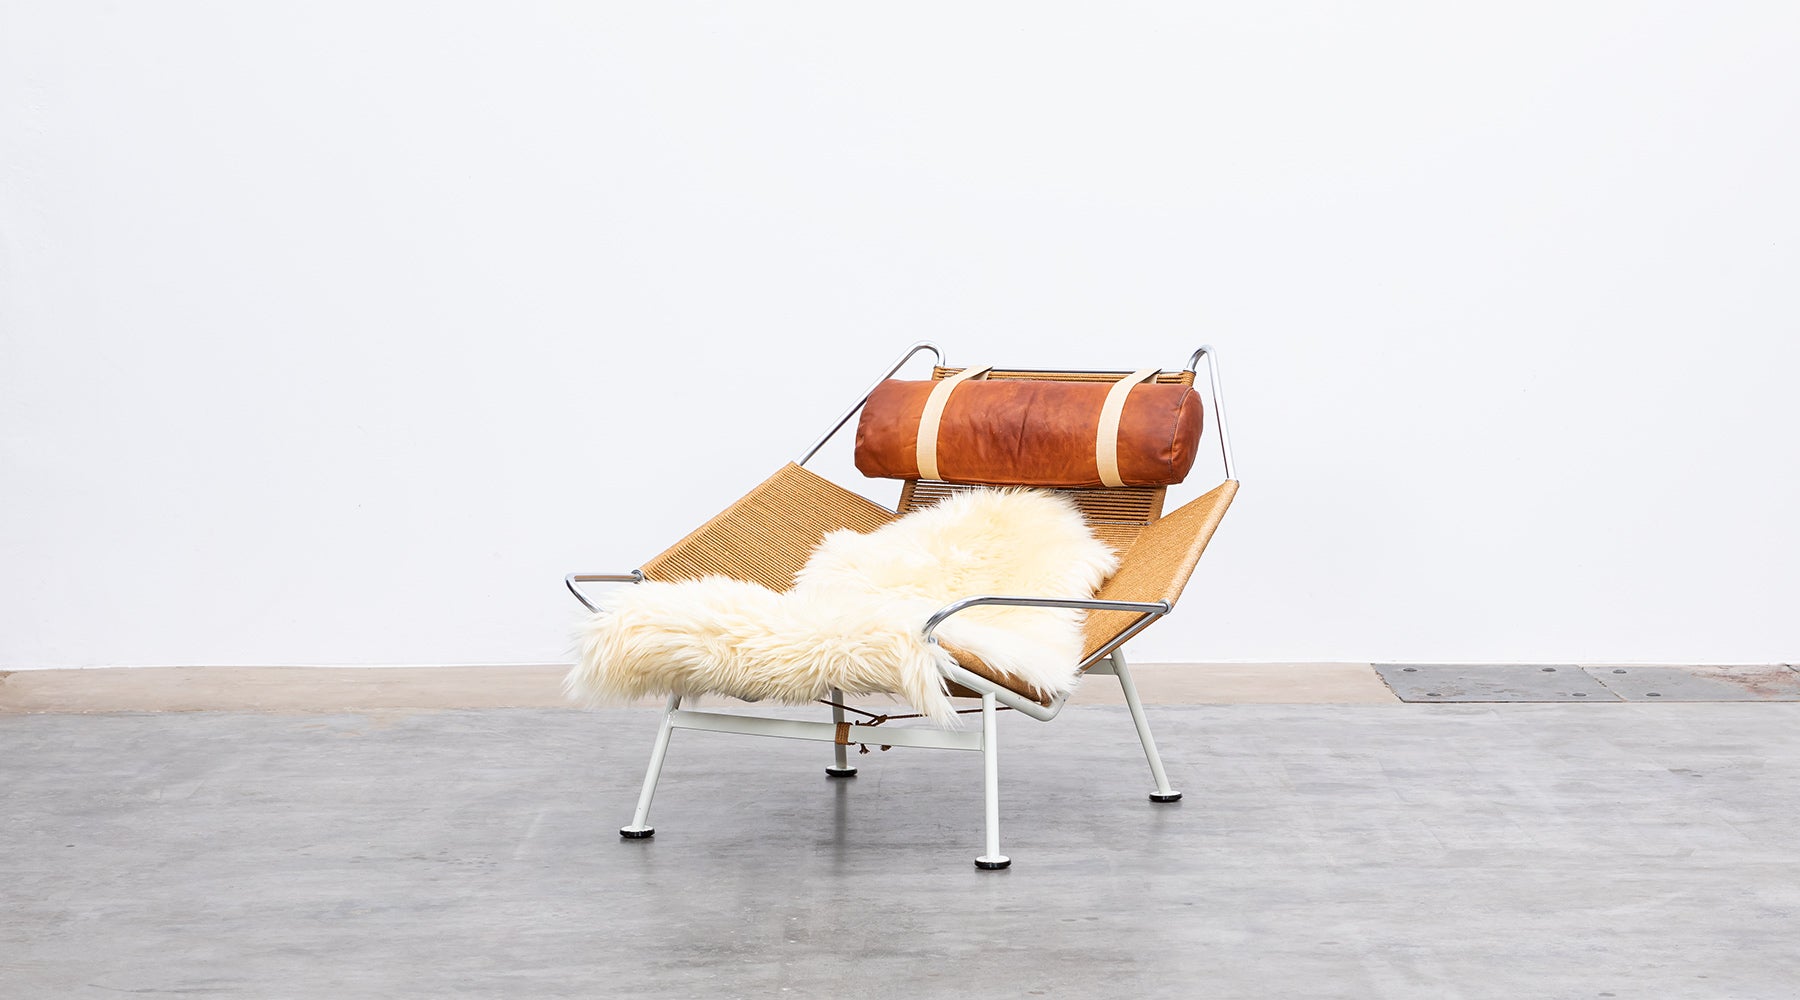 GE225, flag halyard lounge chair, metal, leather by Hans Wegner, Denmark, 1950.

The flag halyard chair has a white lacquered base so that it is visible as a supporting part. The seat shell with flag cord resting on it remained unpainted, so that